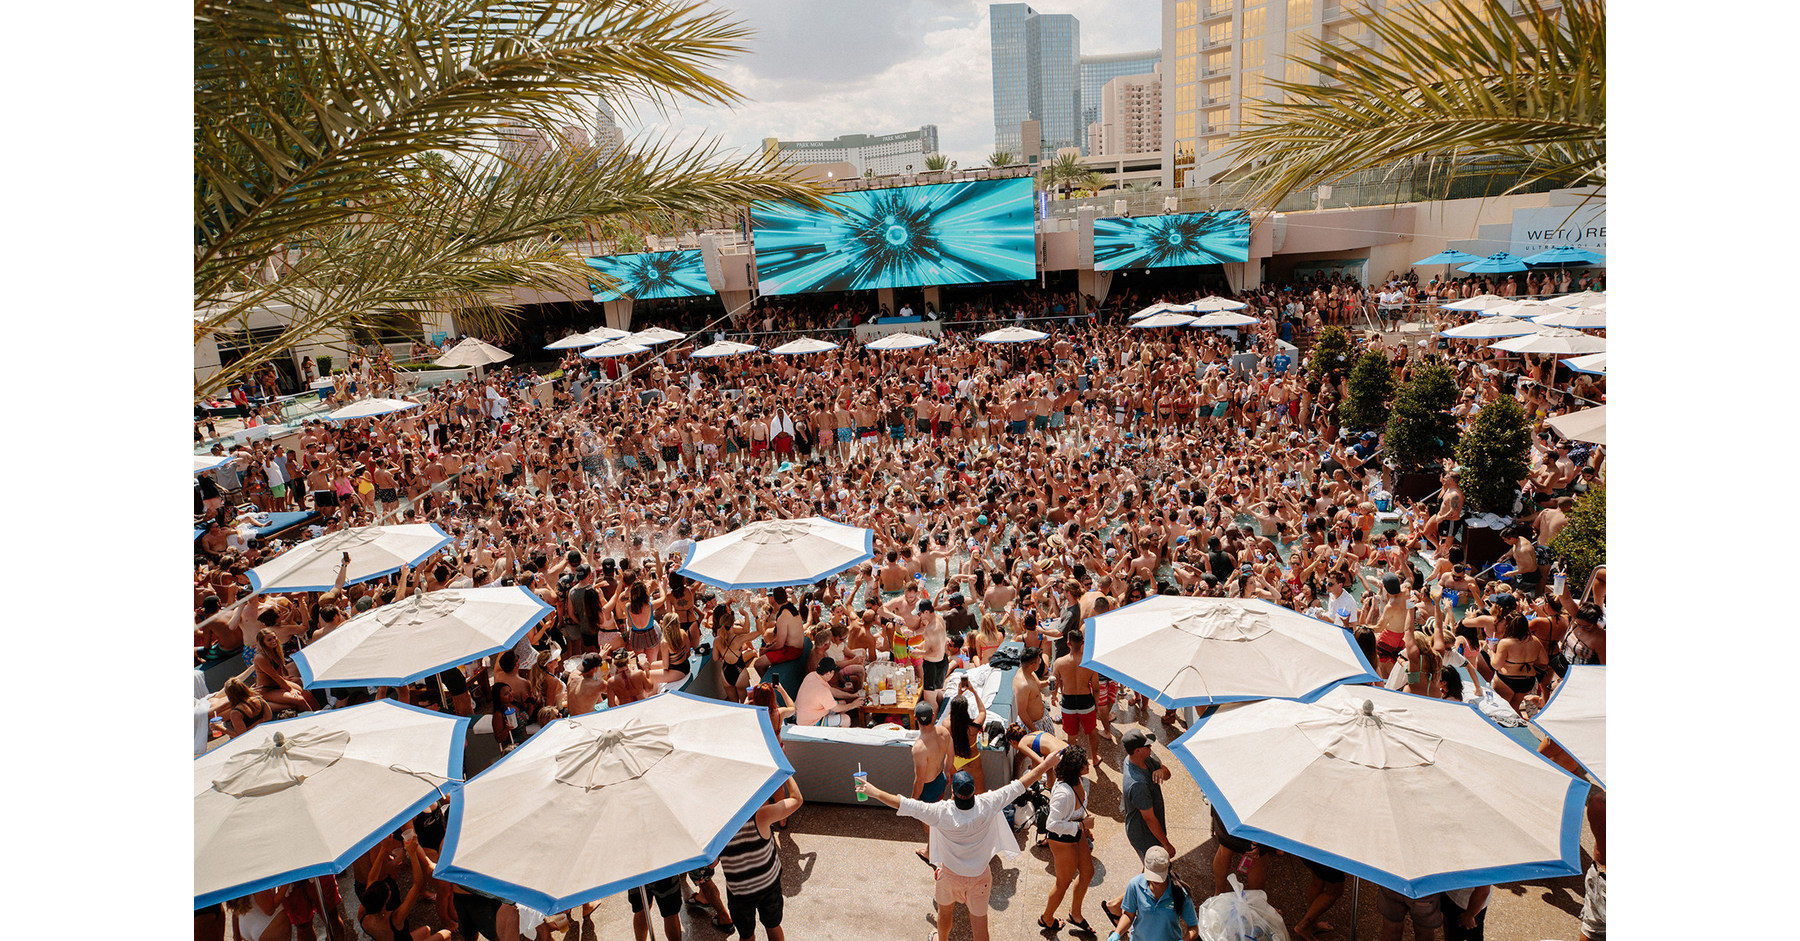 Official Website of Wet Republic Ultra Pool at MGM Grand